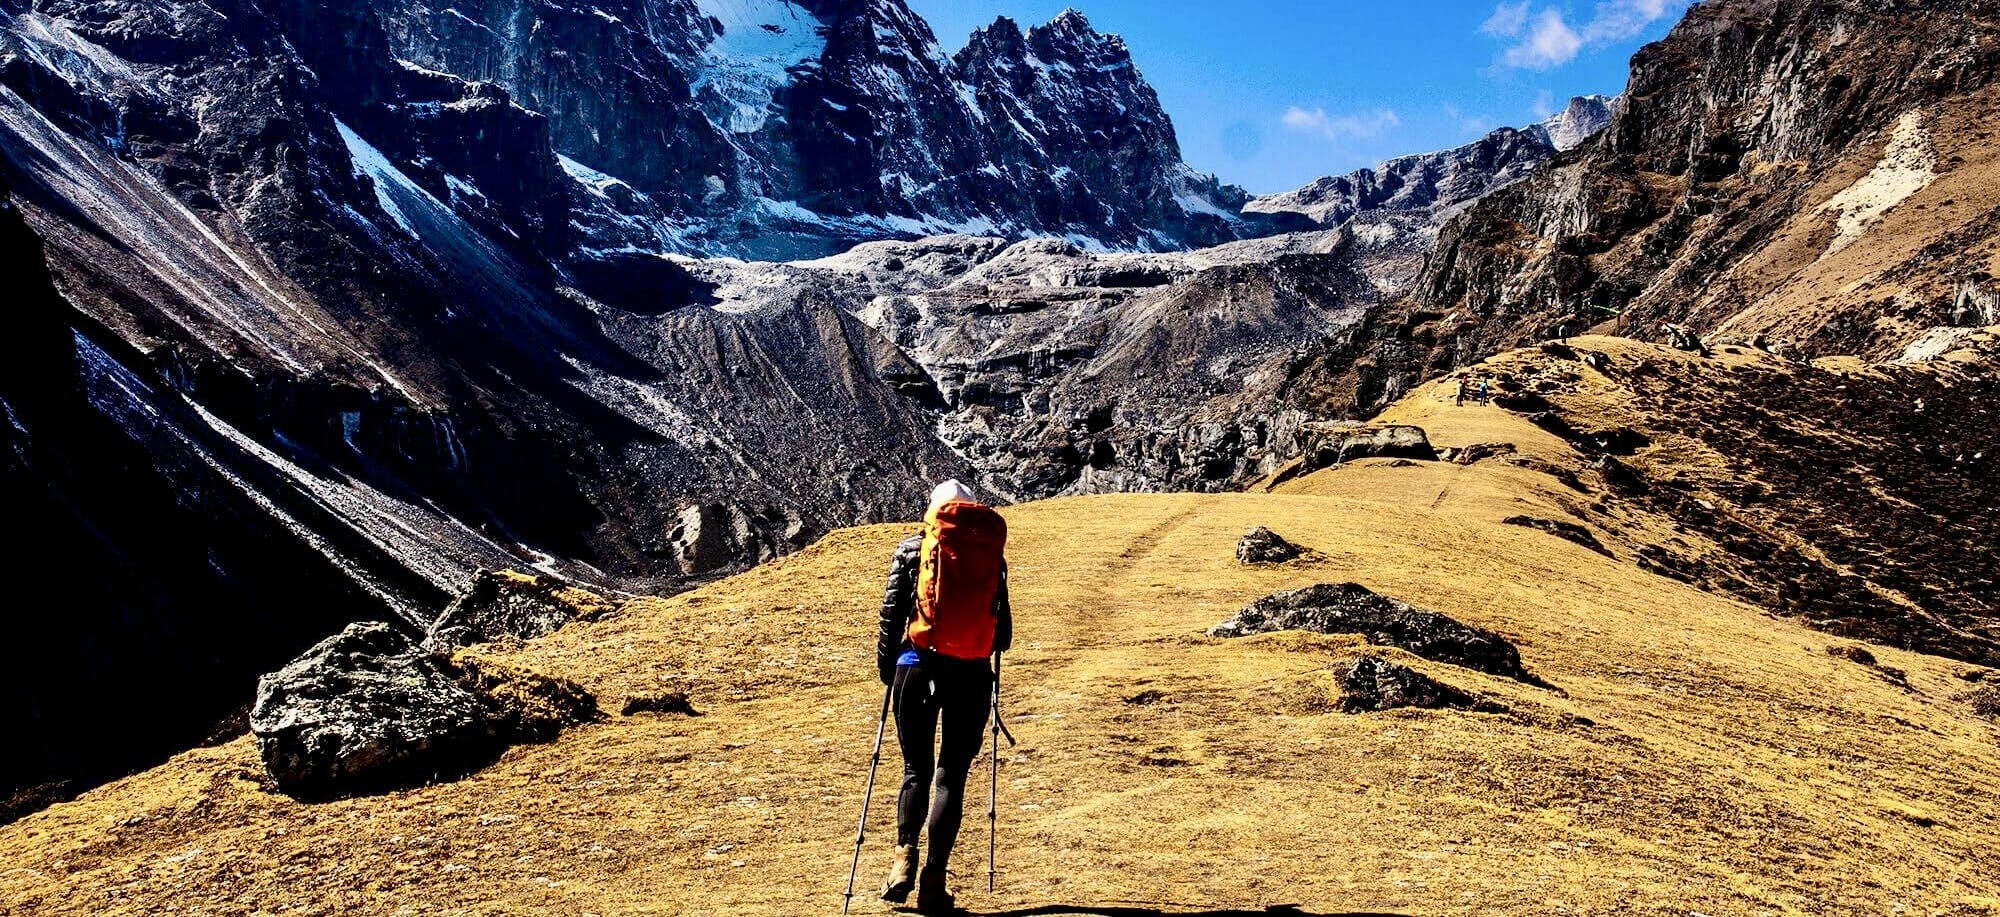 A Step-by-Step Guide to Obtaining a Trekking Permit in Nepal